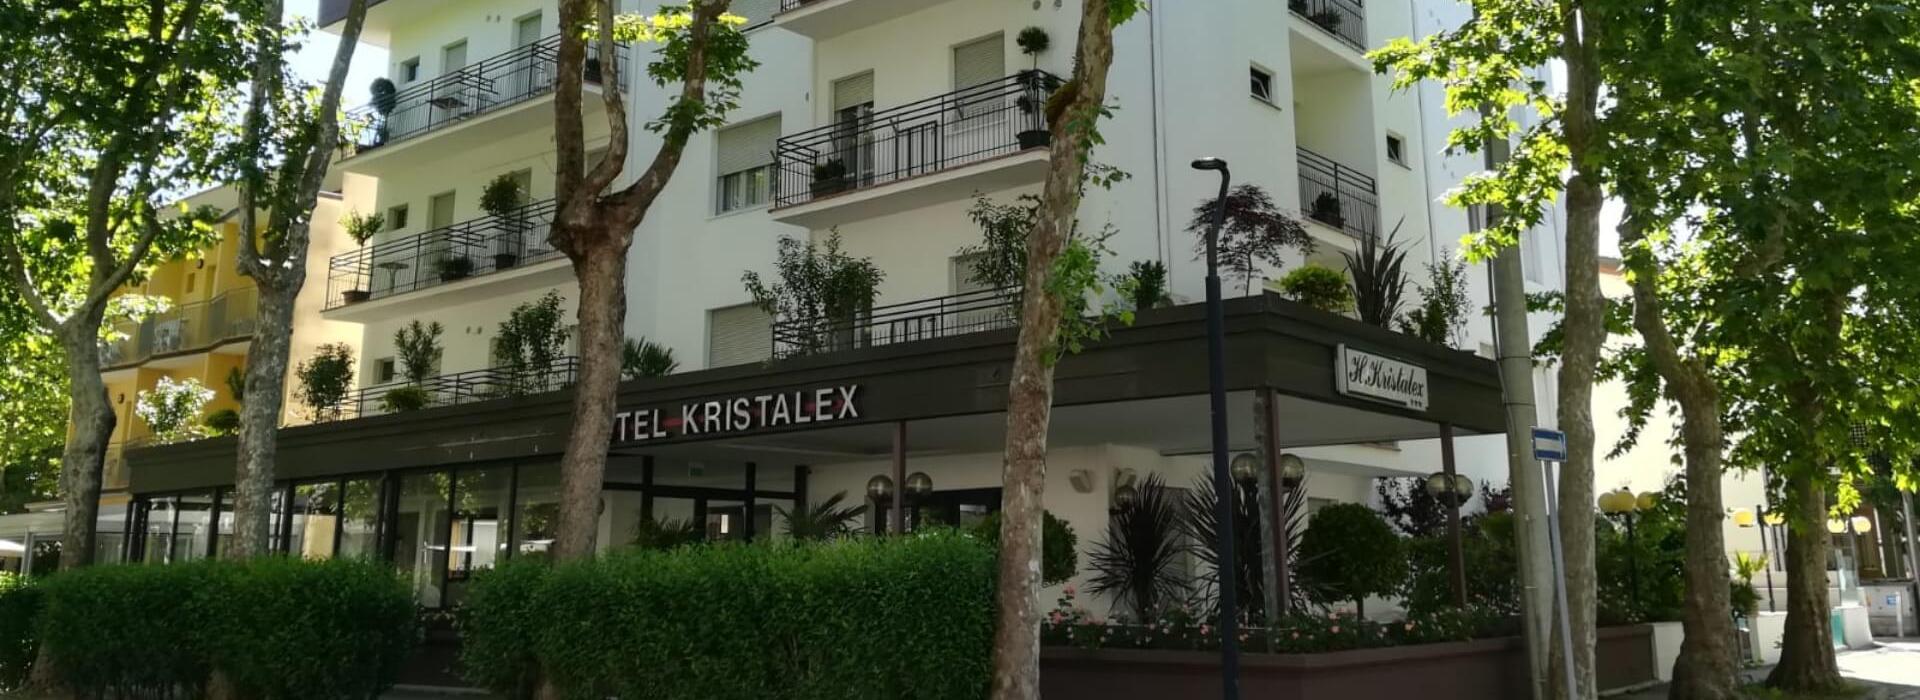 hotelkristalex en easter-holiday-in-cesenatico-in-pet-friendly-hotel-near-the-sea-and-the-centre-of-town 017